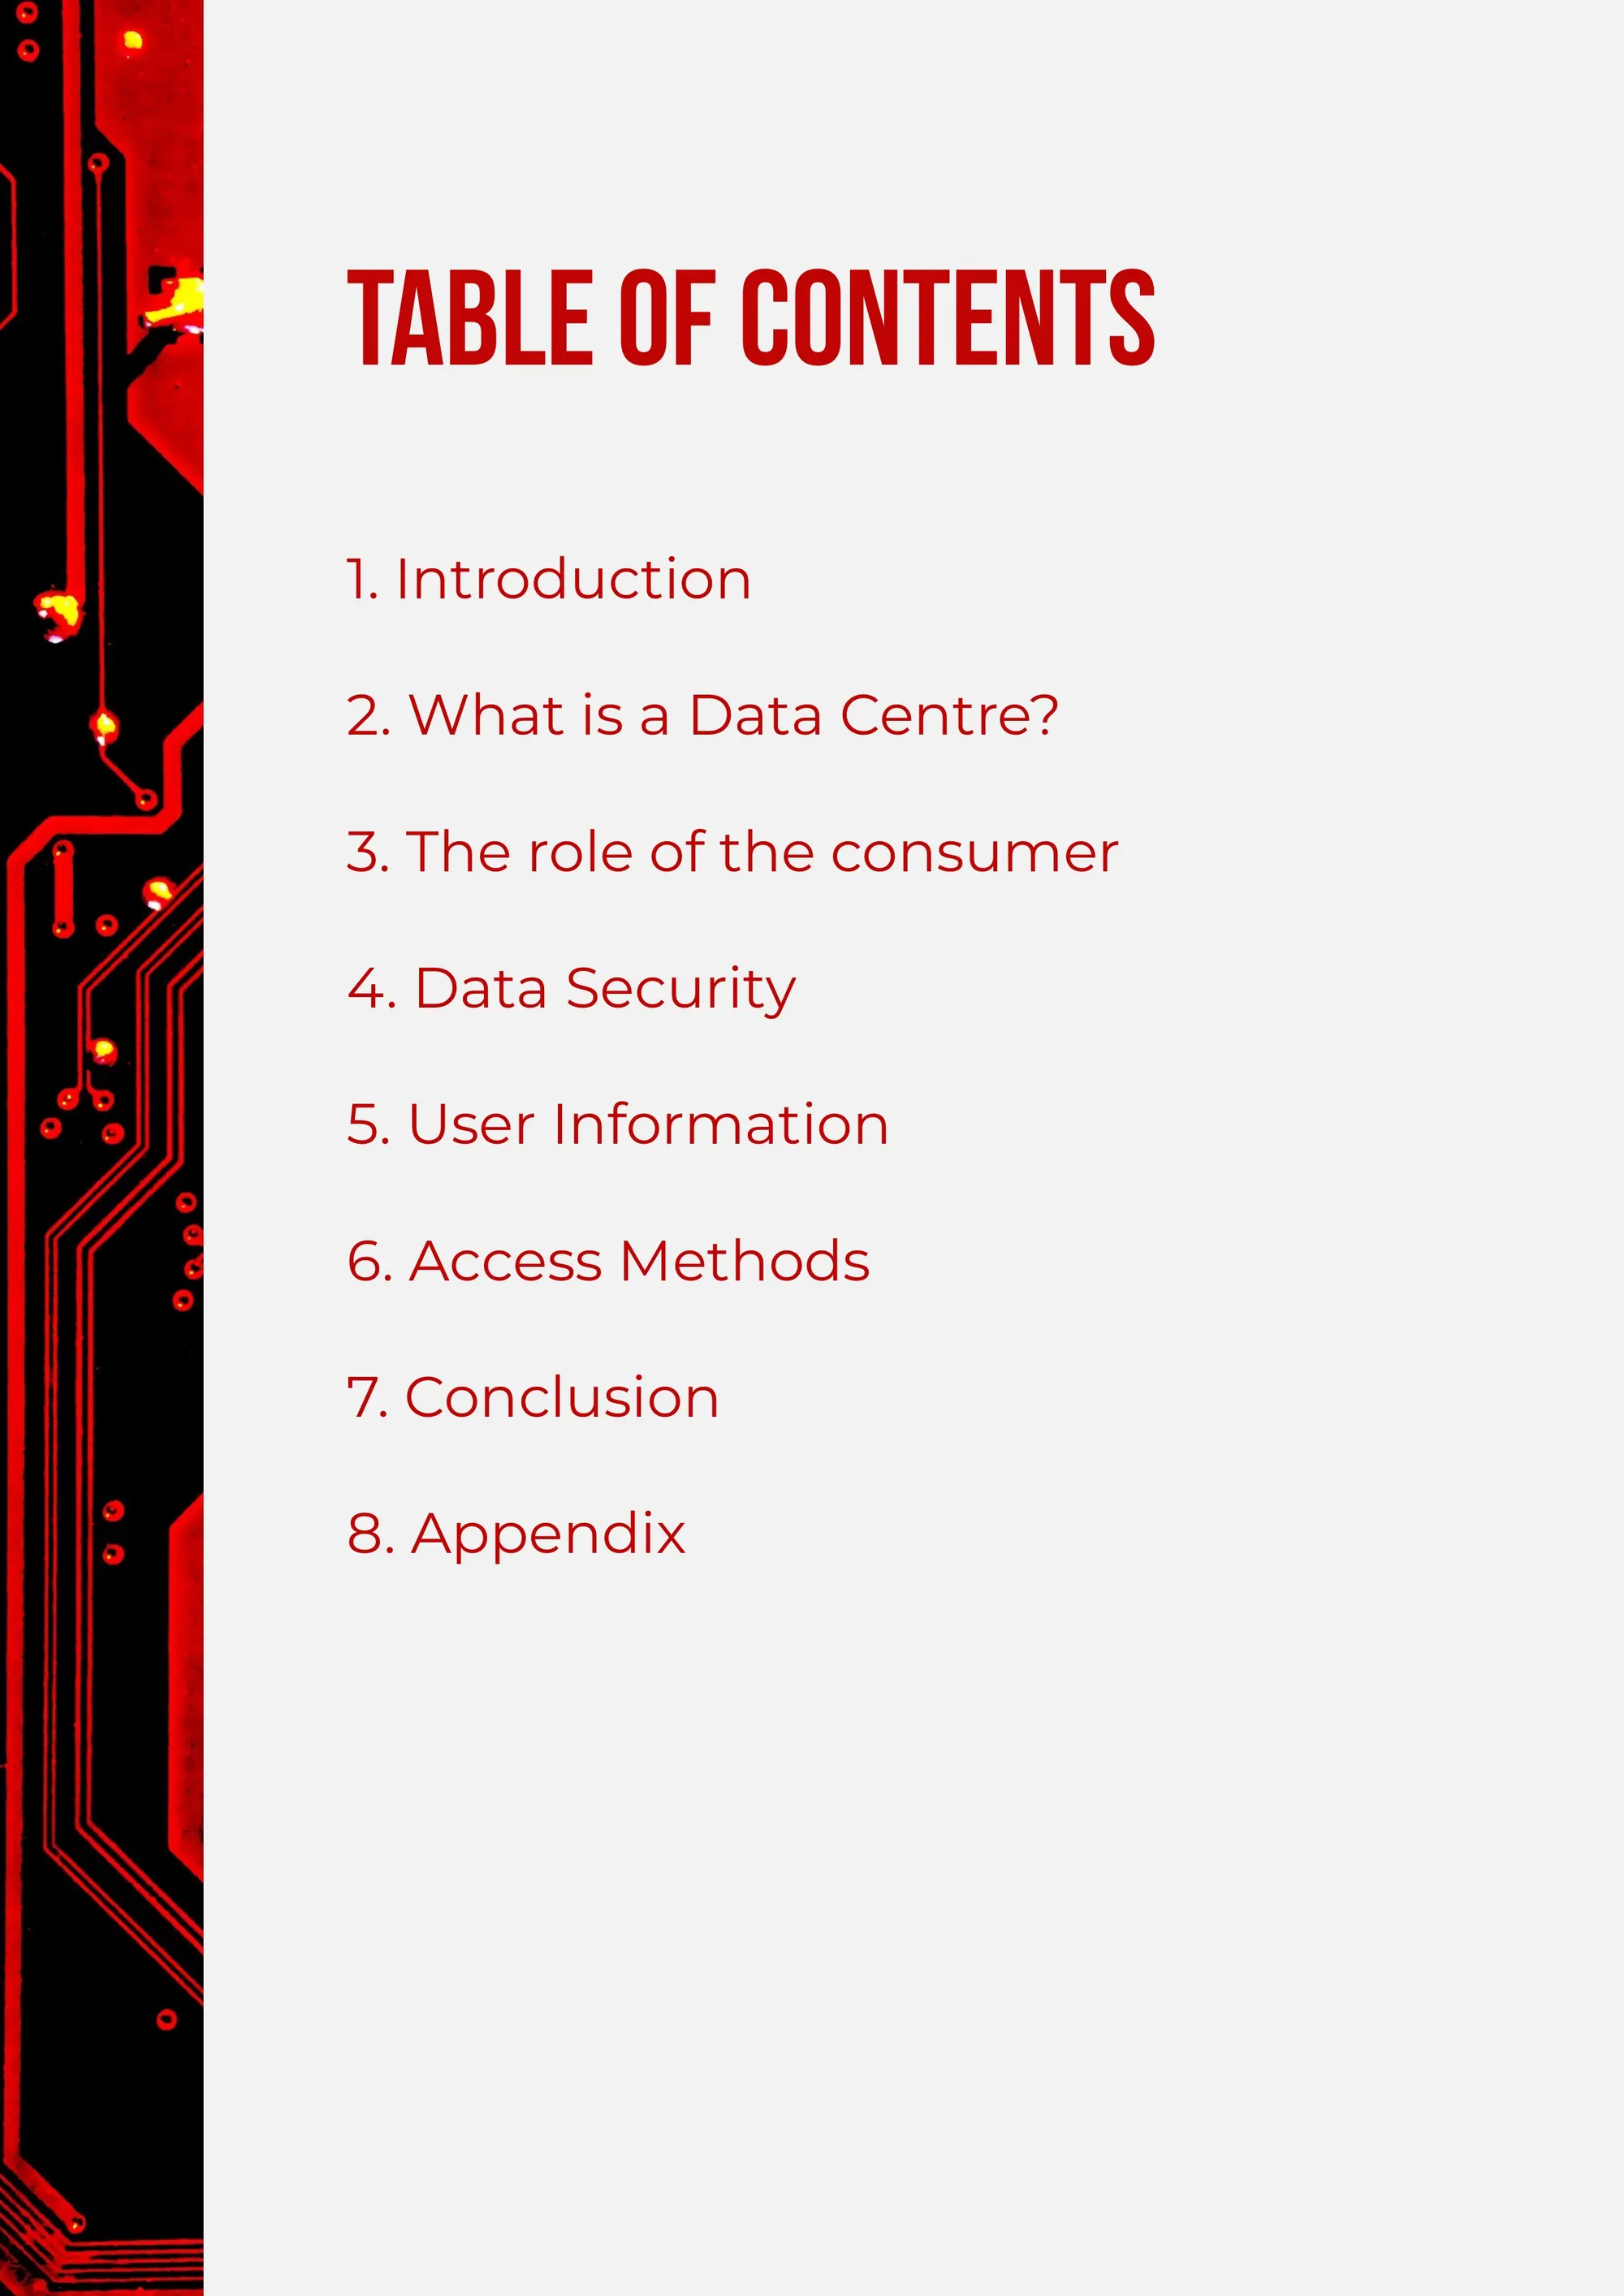 Red Data Centre Whitepaper Contents A4